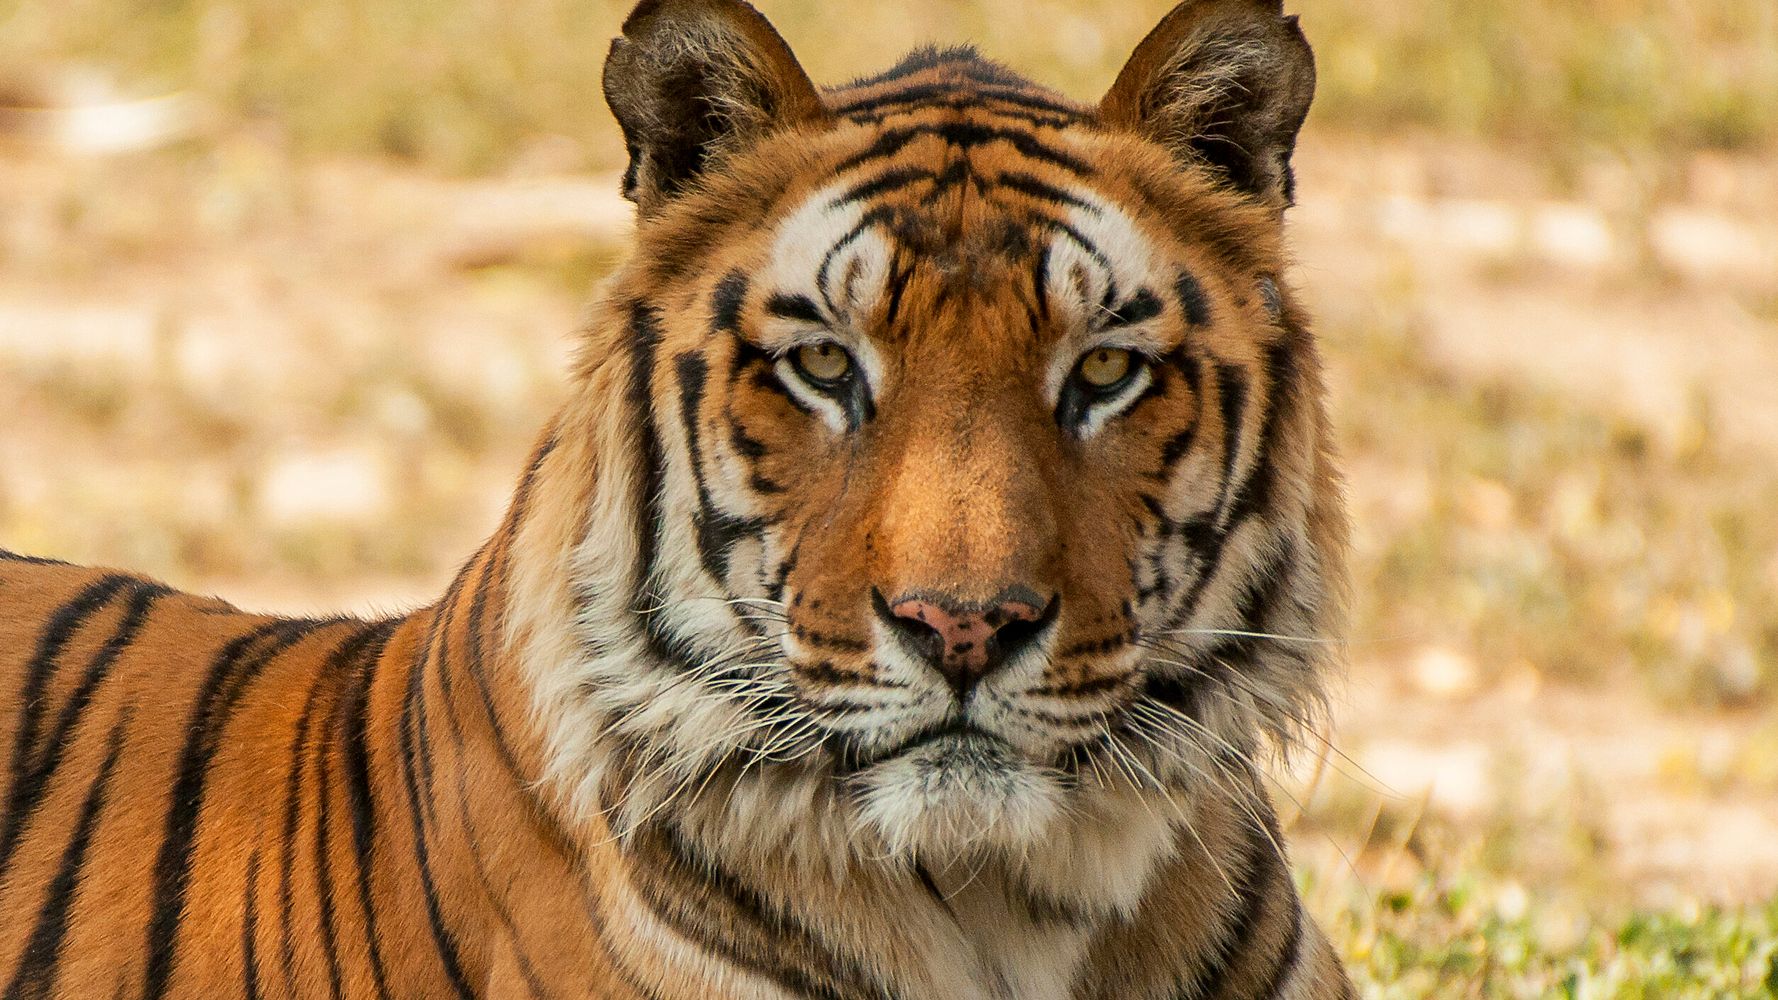 Police Detain Murder Suspect, Can’t Find Tiger He Went On The Run With